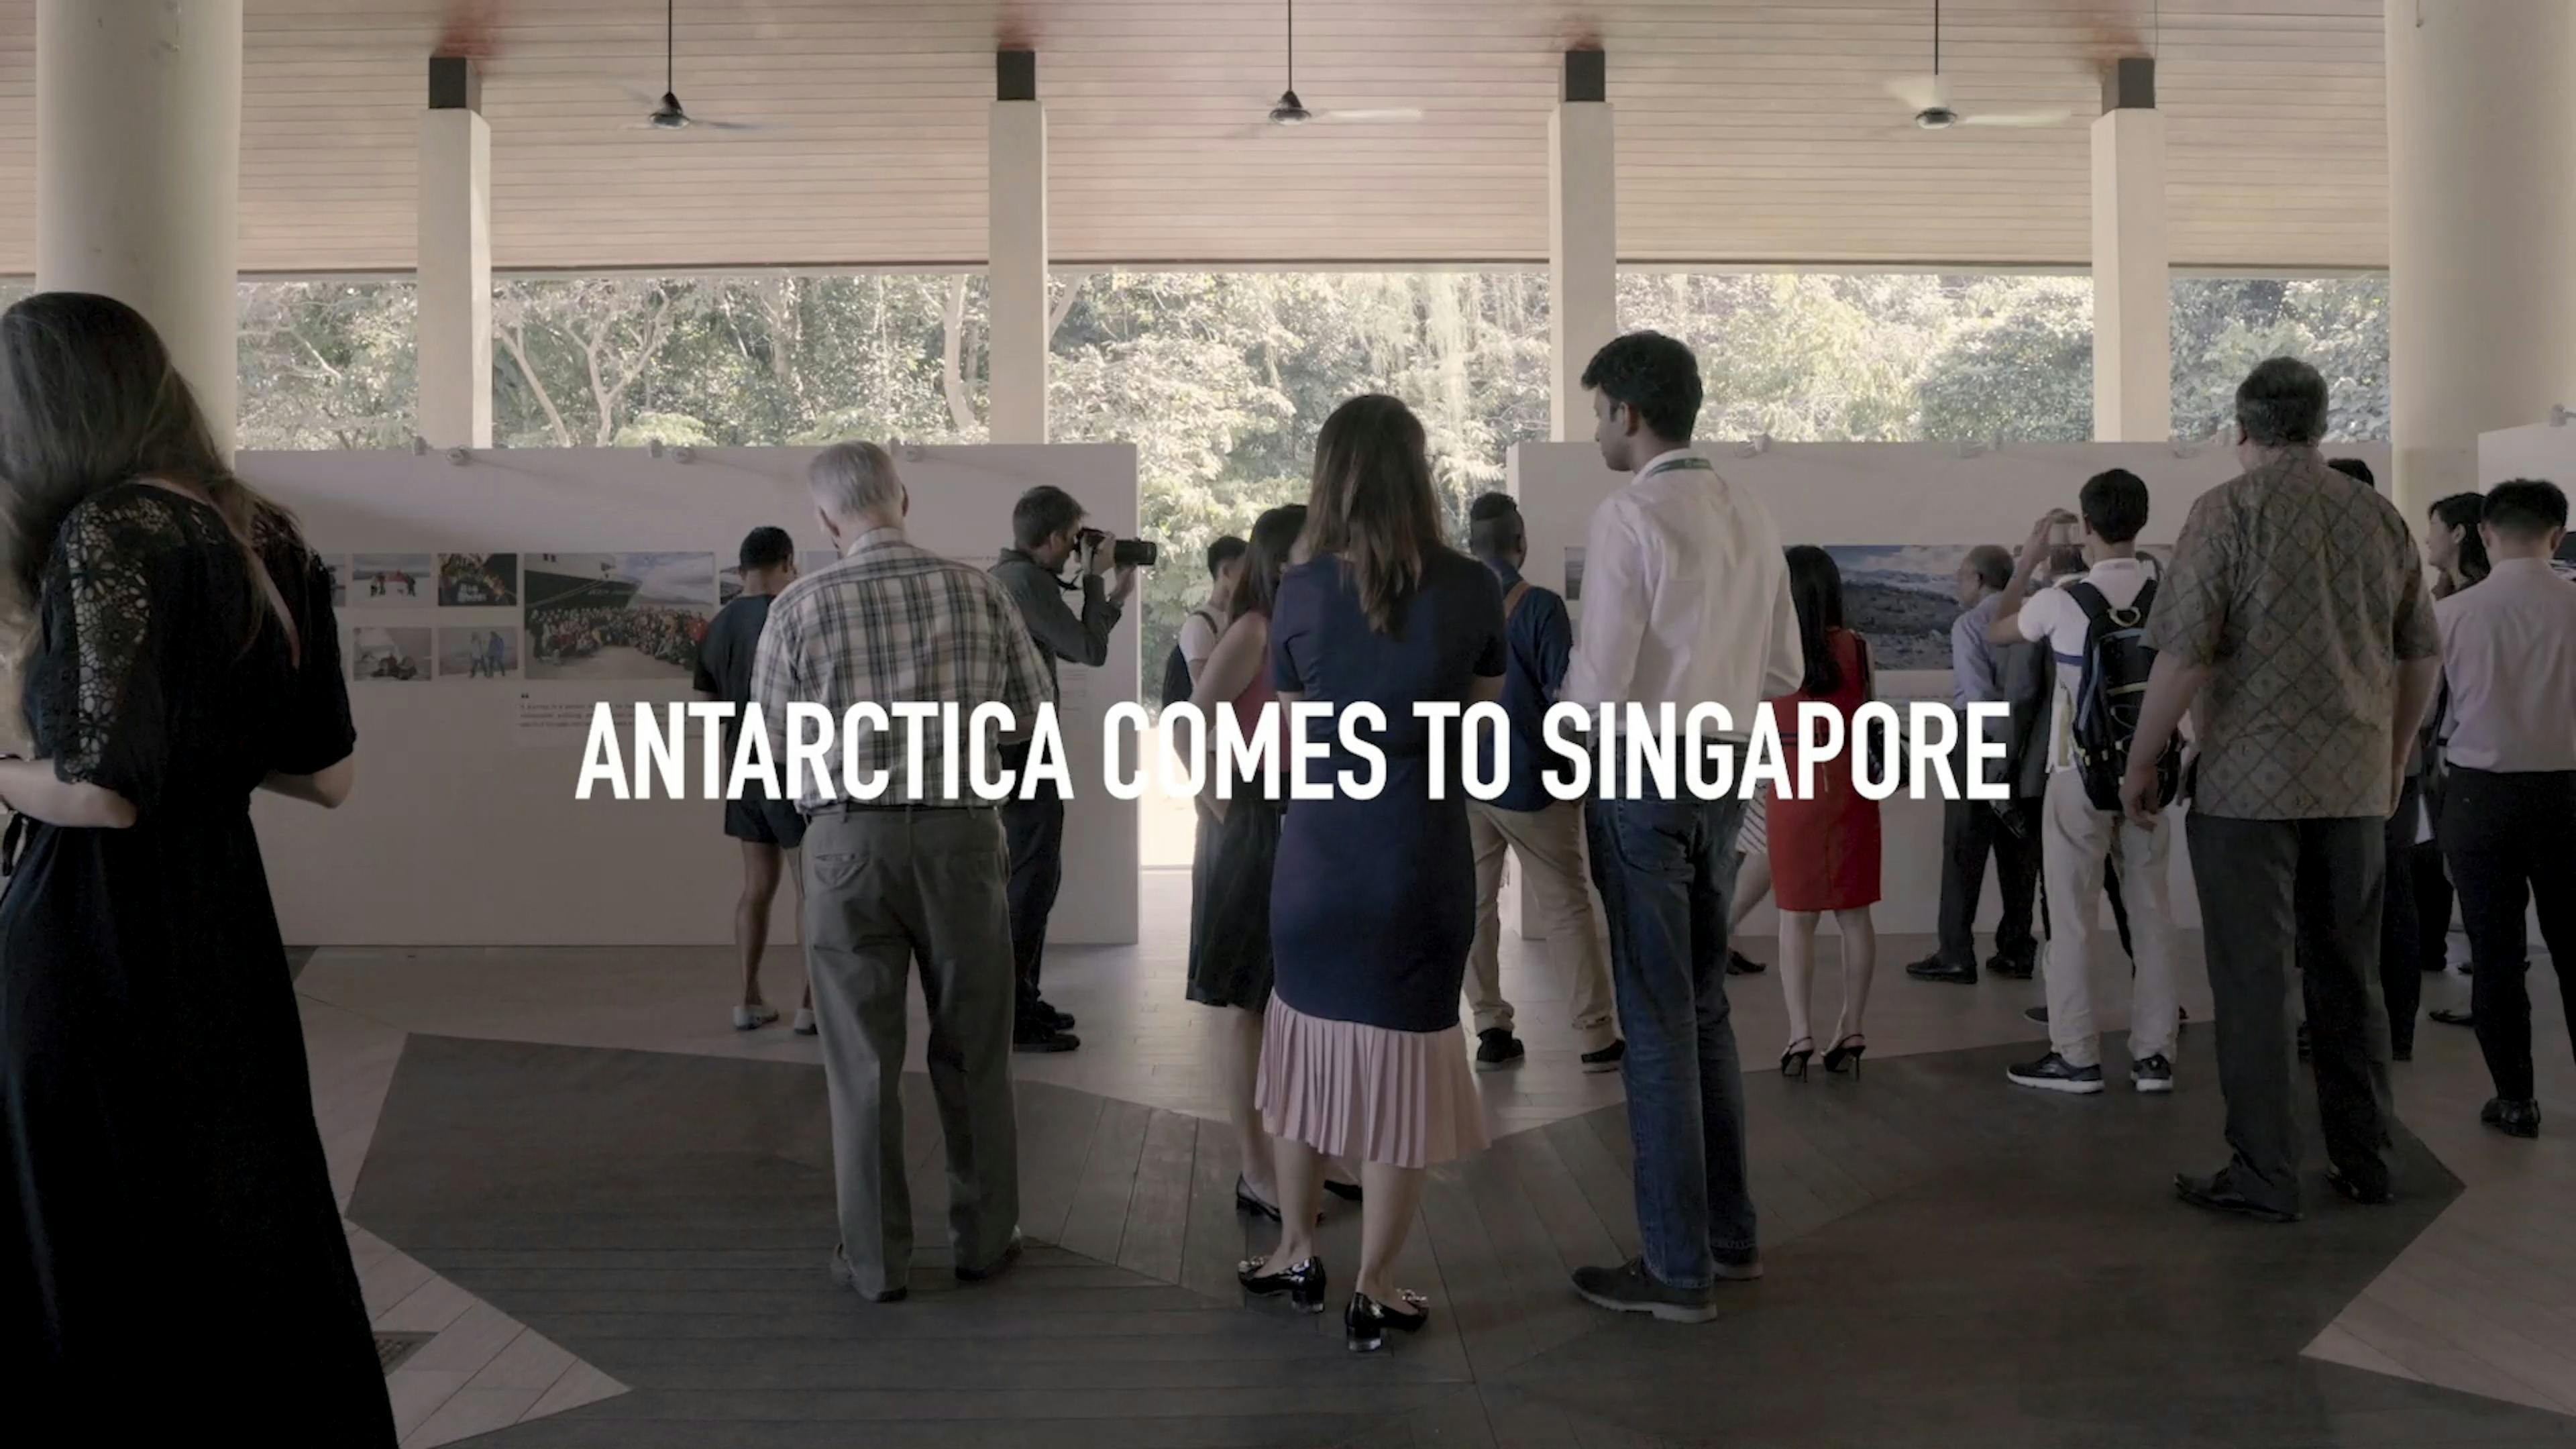 Antarctica comes to Singapore at the Changing Course exhibition. Image: Eco-Business